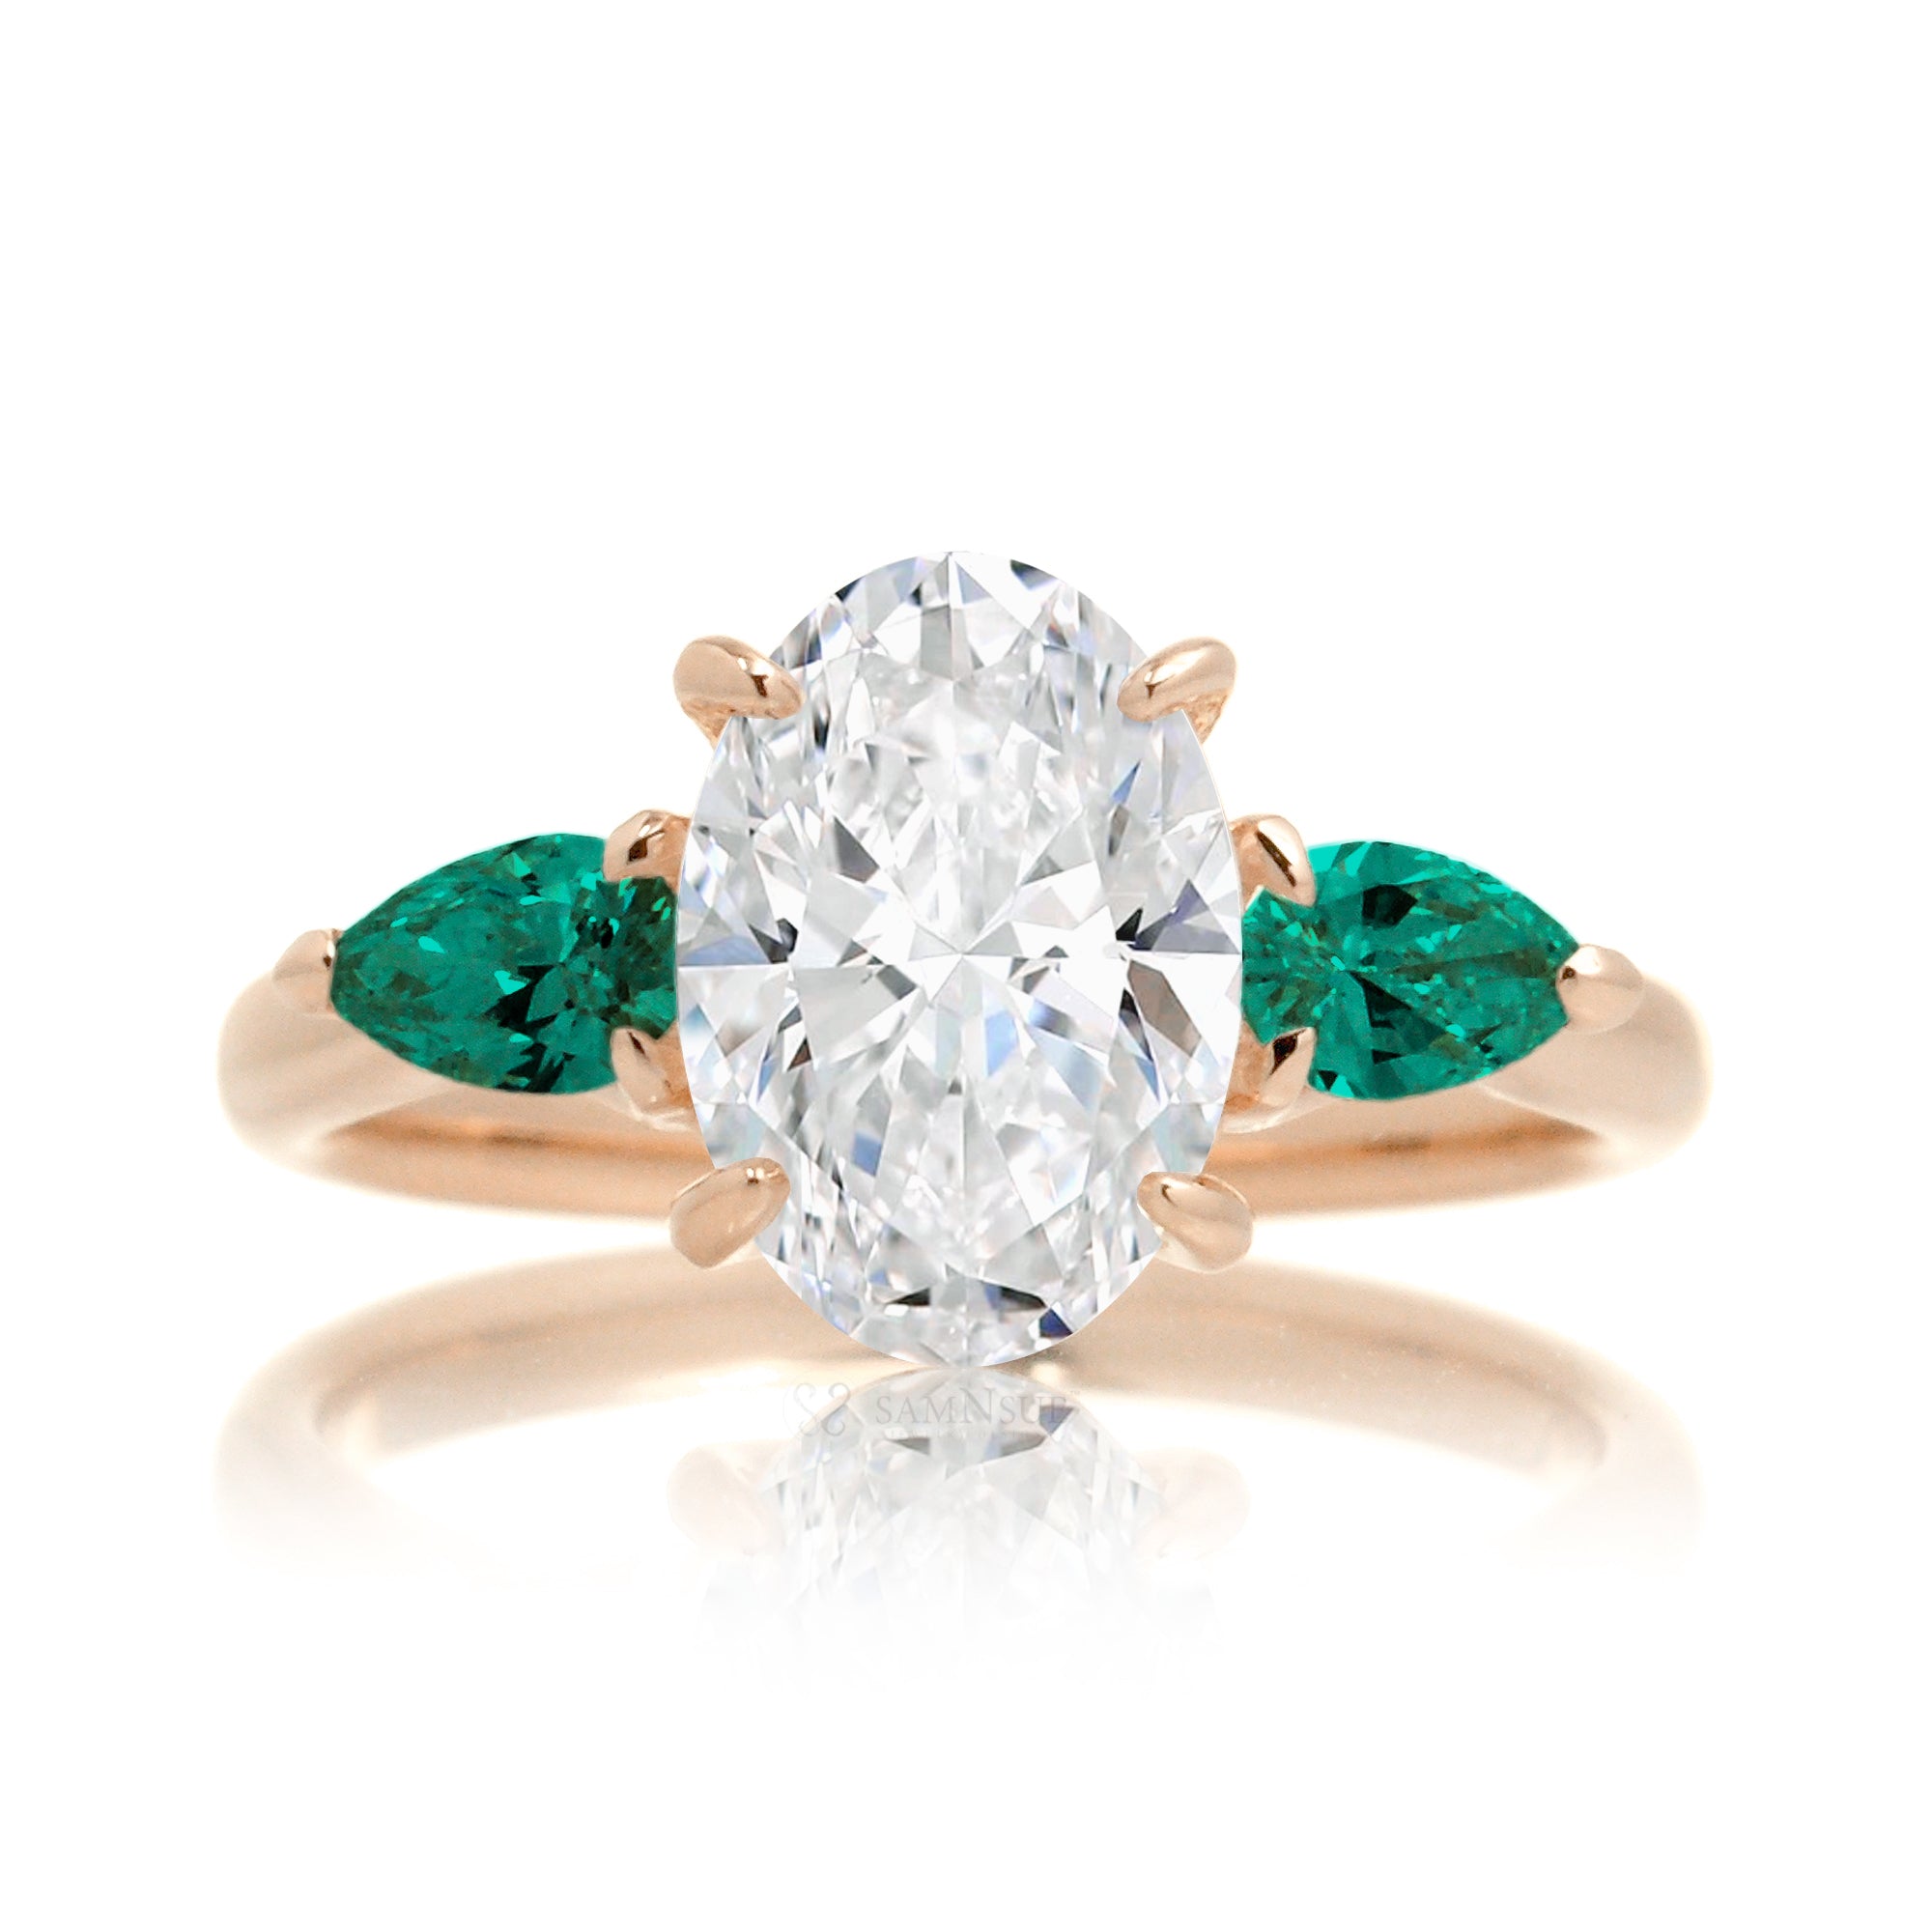 Three-stone pear emerald and oval cut diamond engagement ring rose gold